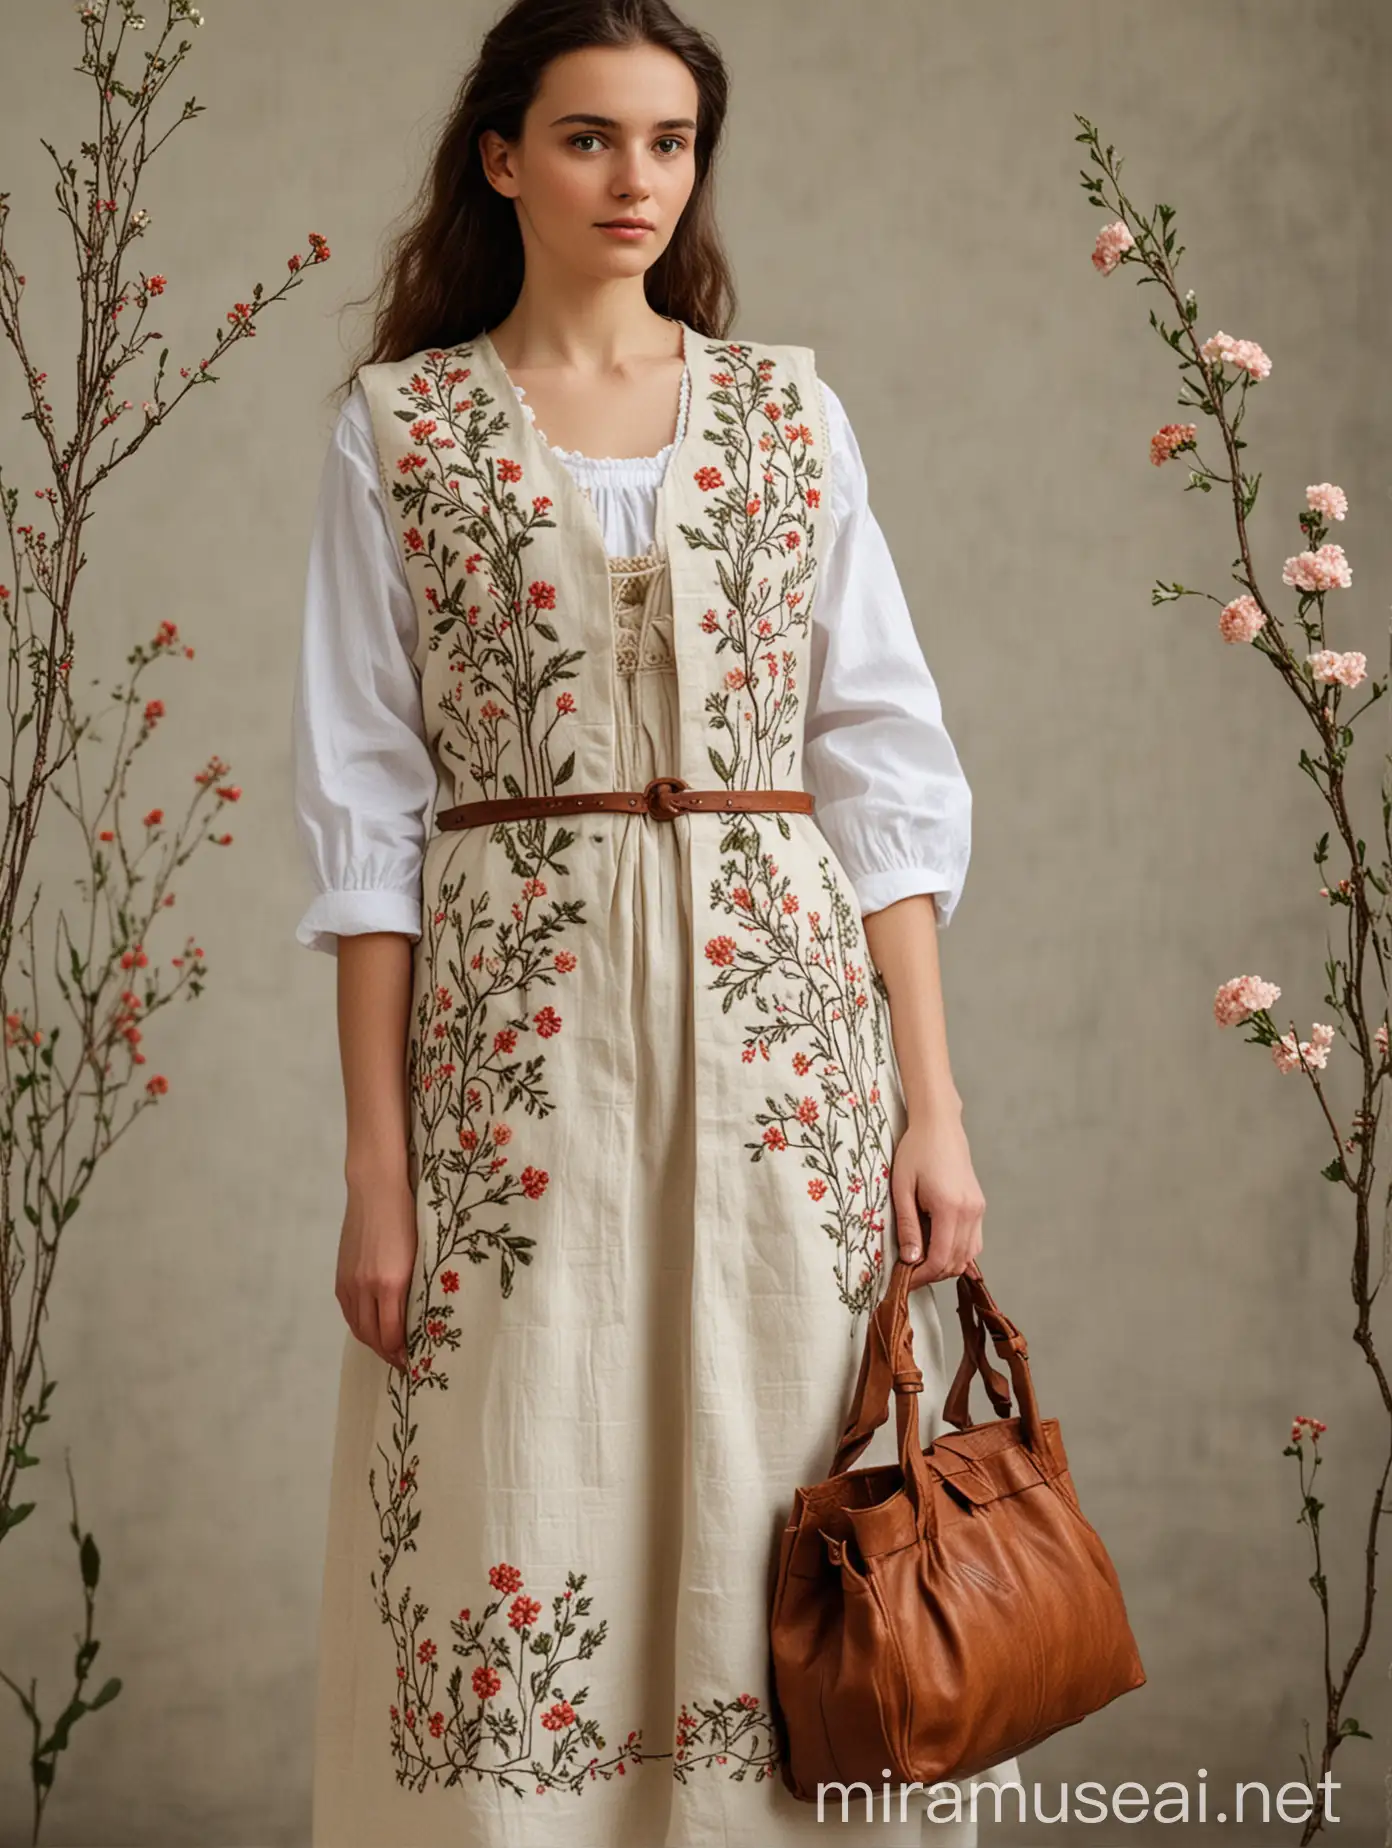 Womans Handmade Linen Dress and Vest Embroidered with Floral Motifs